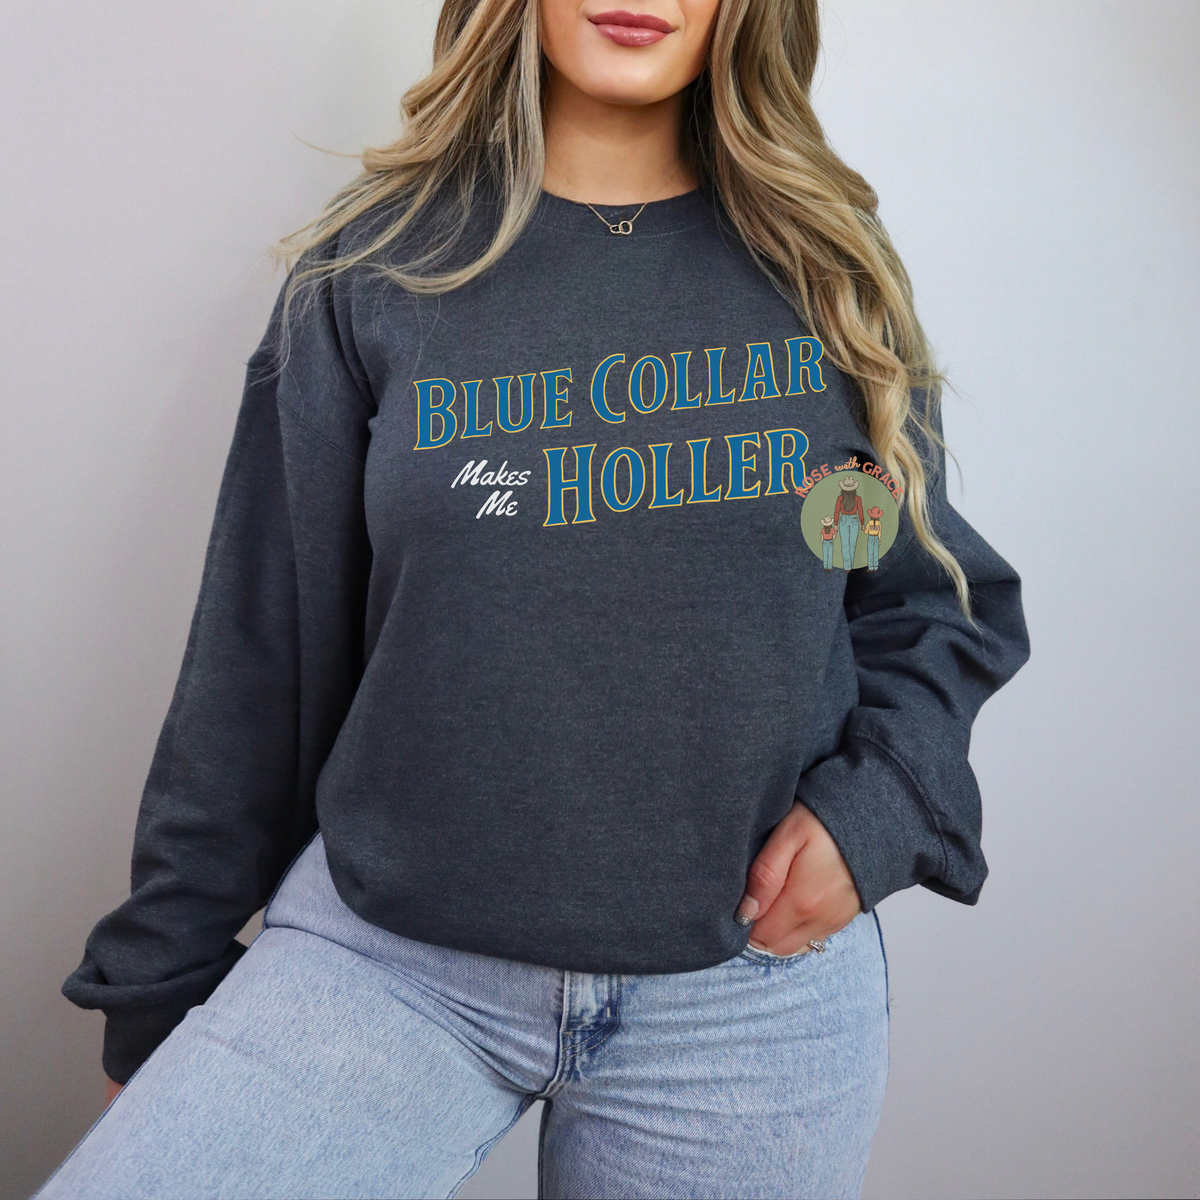 Blue Collar Makes Me Holler RWG EXCLUSIVE ORIGNAL -Crewneck or Hoodie *YOU PICK COLOR*